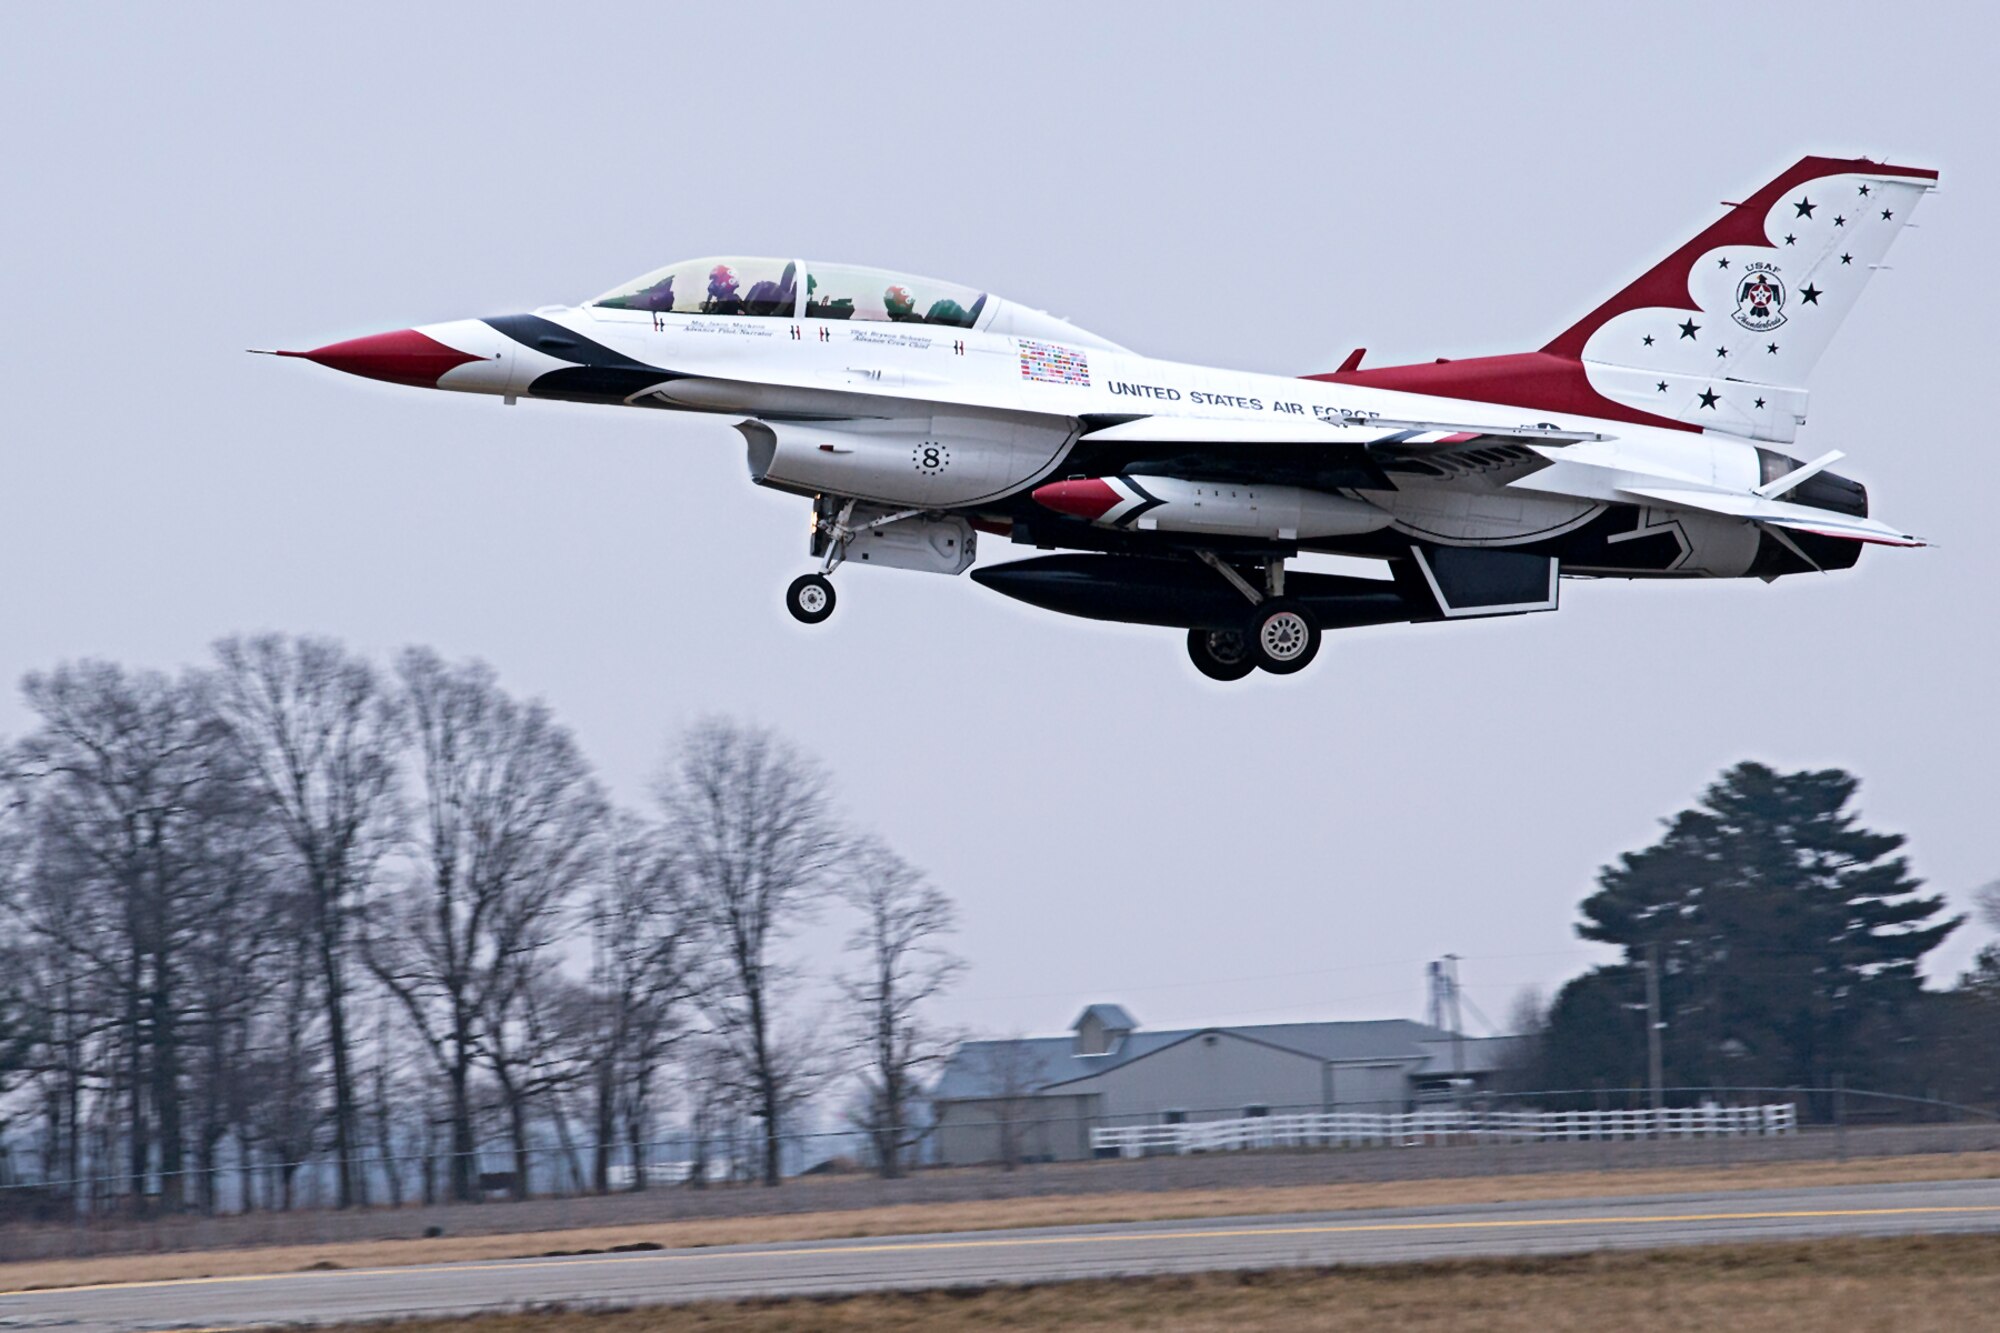 Maj. Jason Markzon, pilot of Thunderbird 8 and the advance pilot and narrator, along with Tech Sgt. Bryson Schuster, crew chief and maintenance advance team member, land at Grissom Air Reserve Base, Ind., Feb. 5, 2019. The Thunderbird members visited the base in preparation for the Grissom Air and Space Expo scheduled for Sept. 7-8, 2019. (U.S. Air Force photo/Douglas Hays)